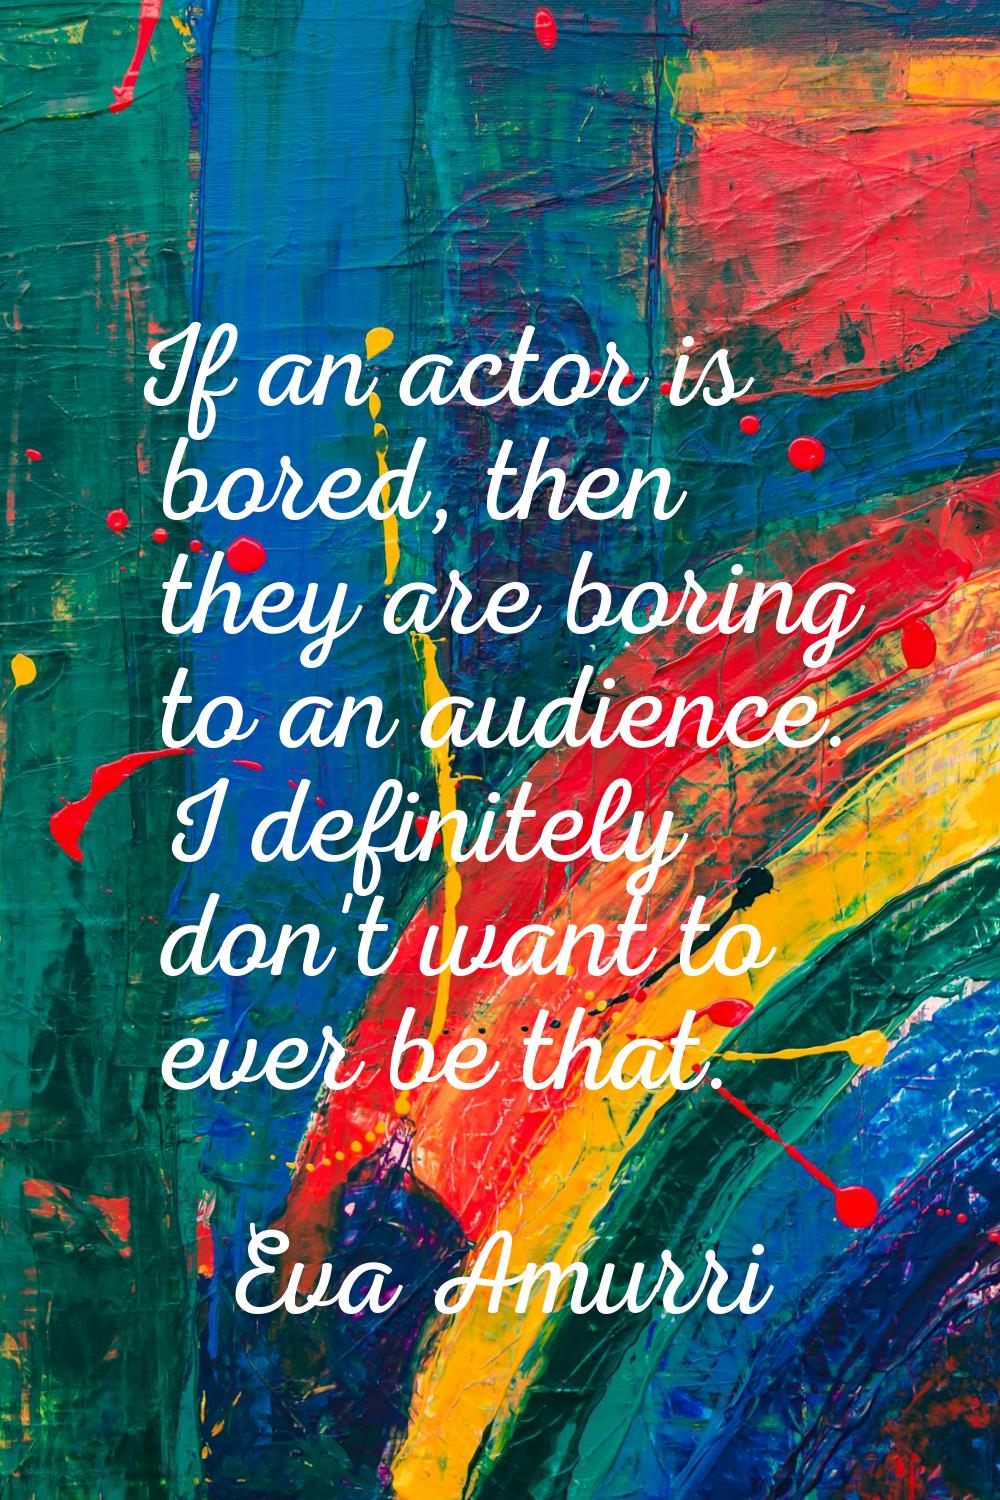 If an actor is bored, then they are boring to an audience. I definitely don't want to ever be that.